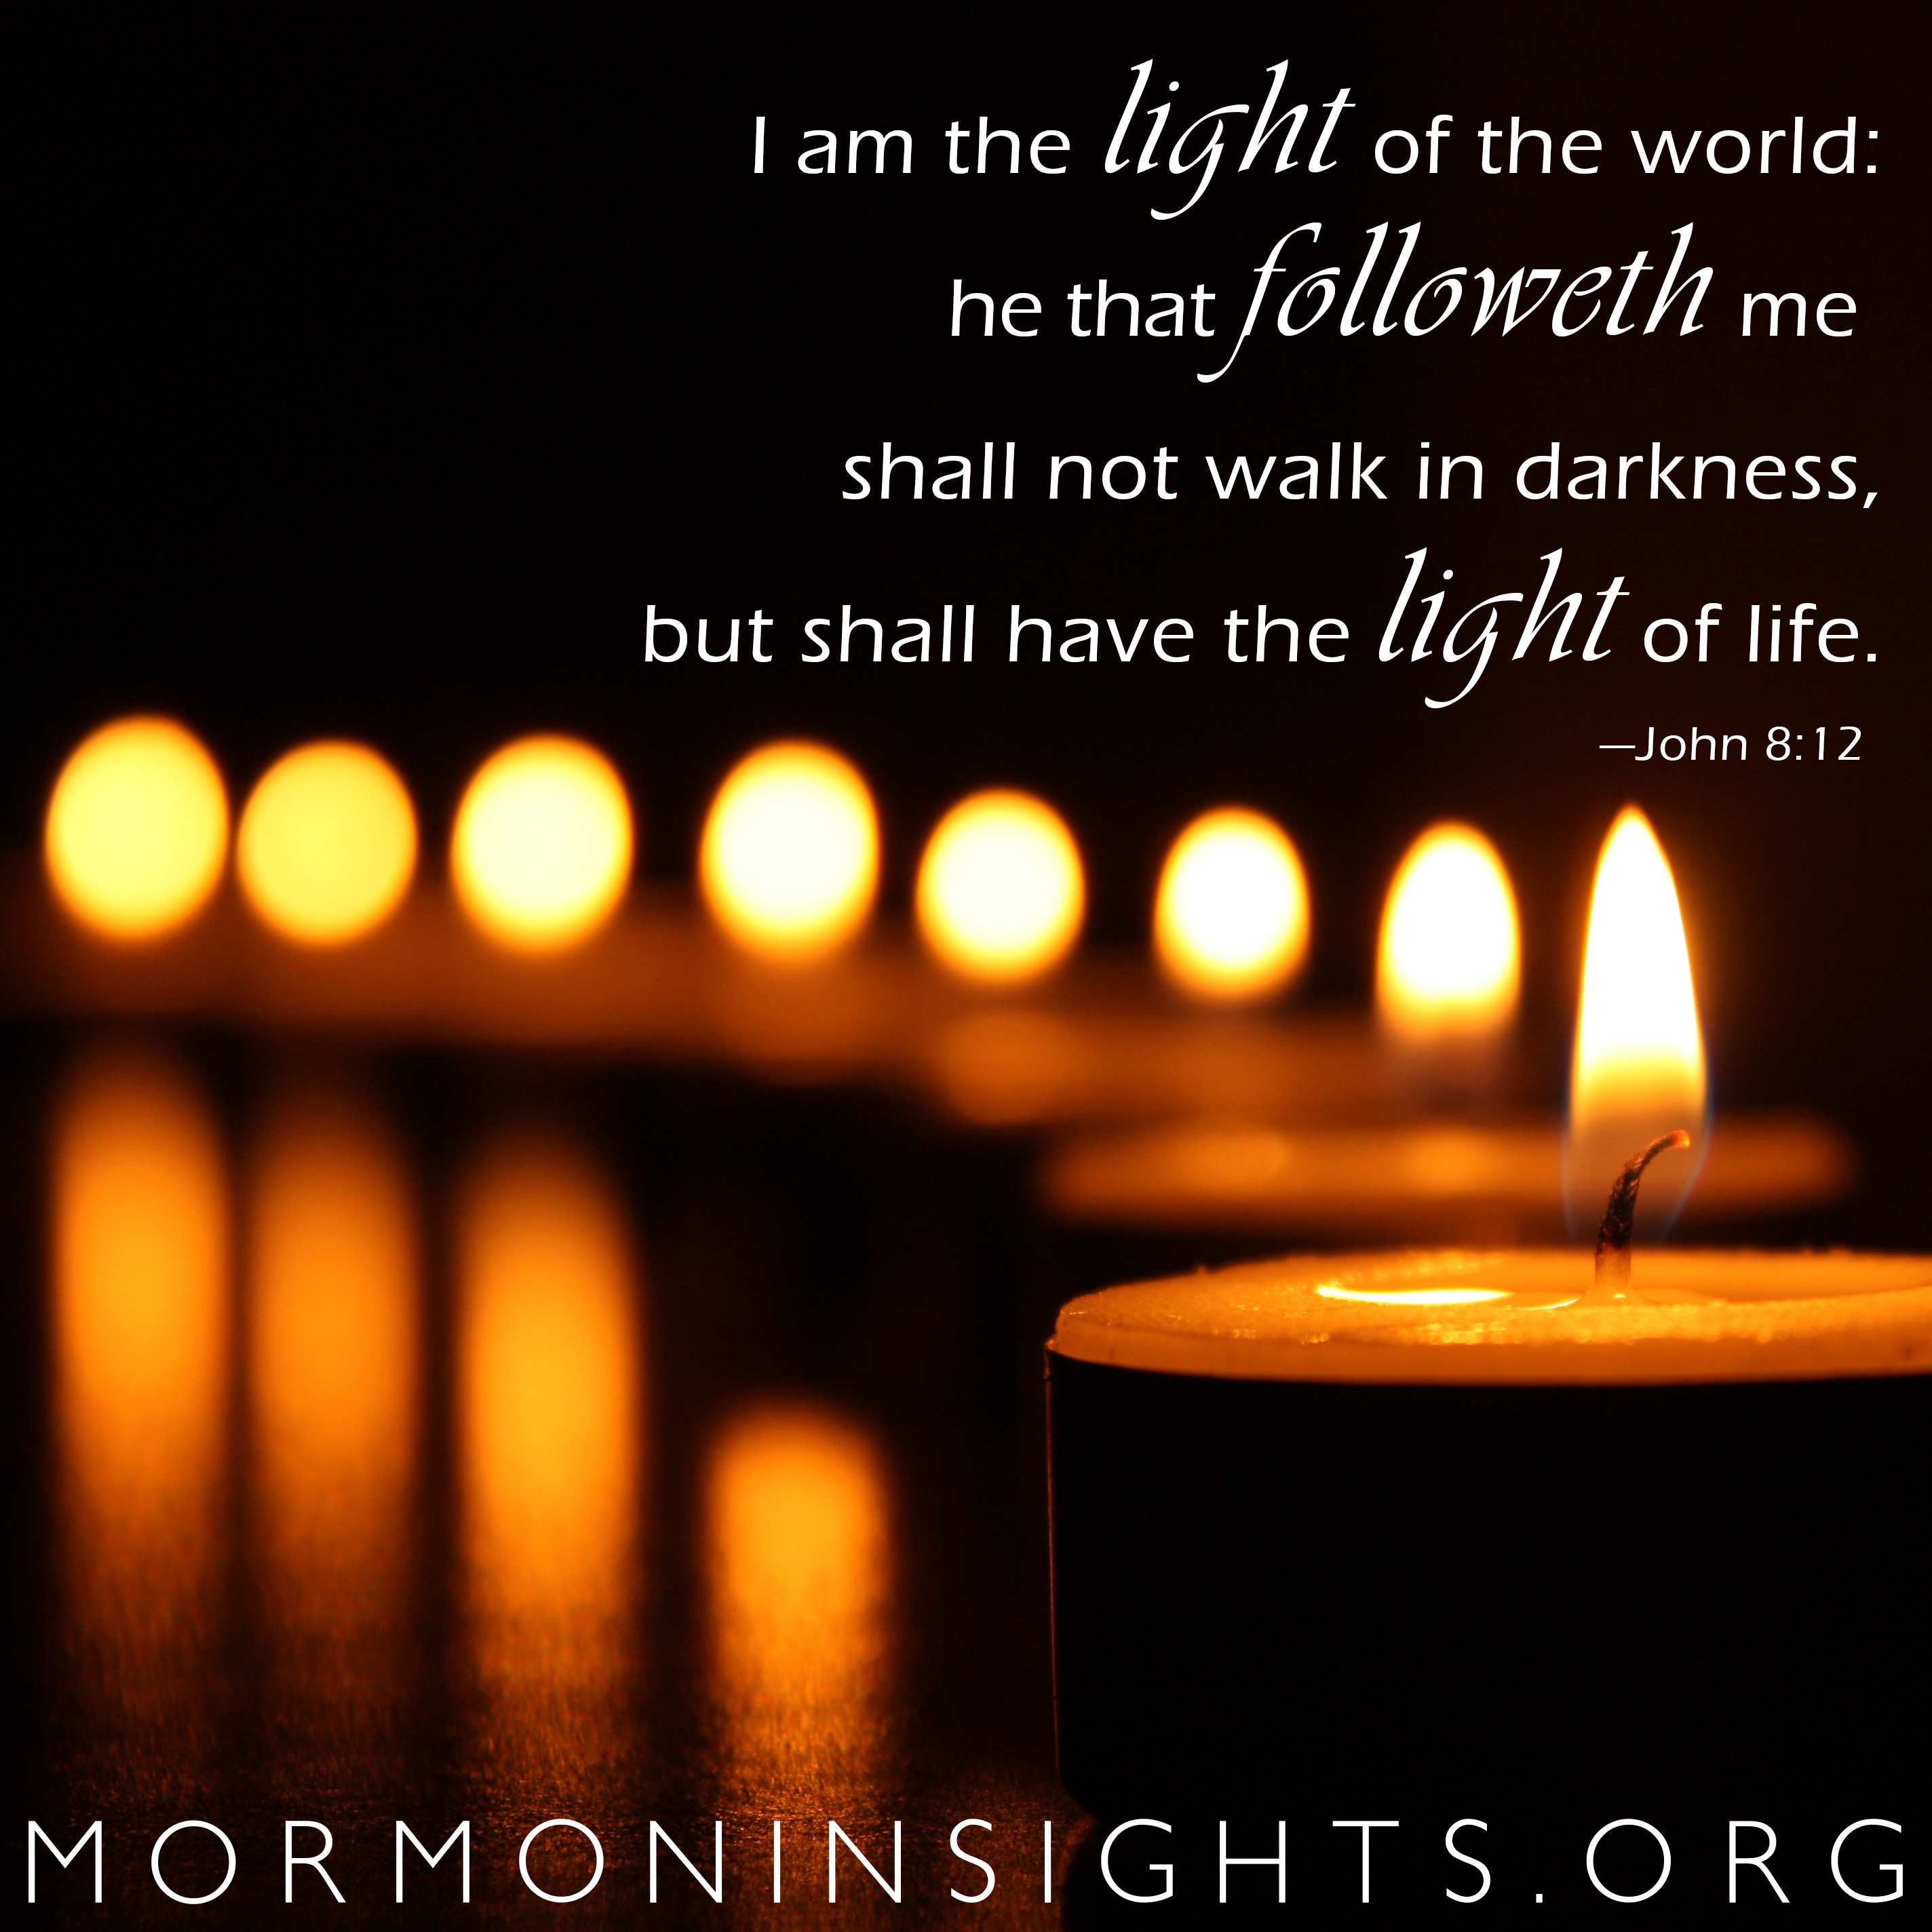 "I am the light of the world: he that followeth me shall not walk in darkness, but shall have the light of life." John 8:12